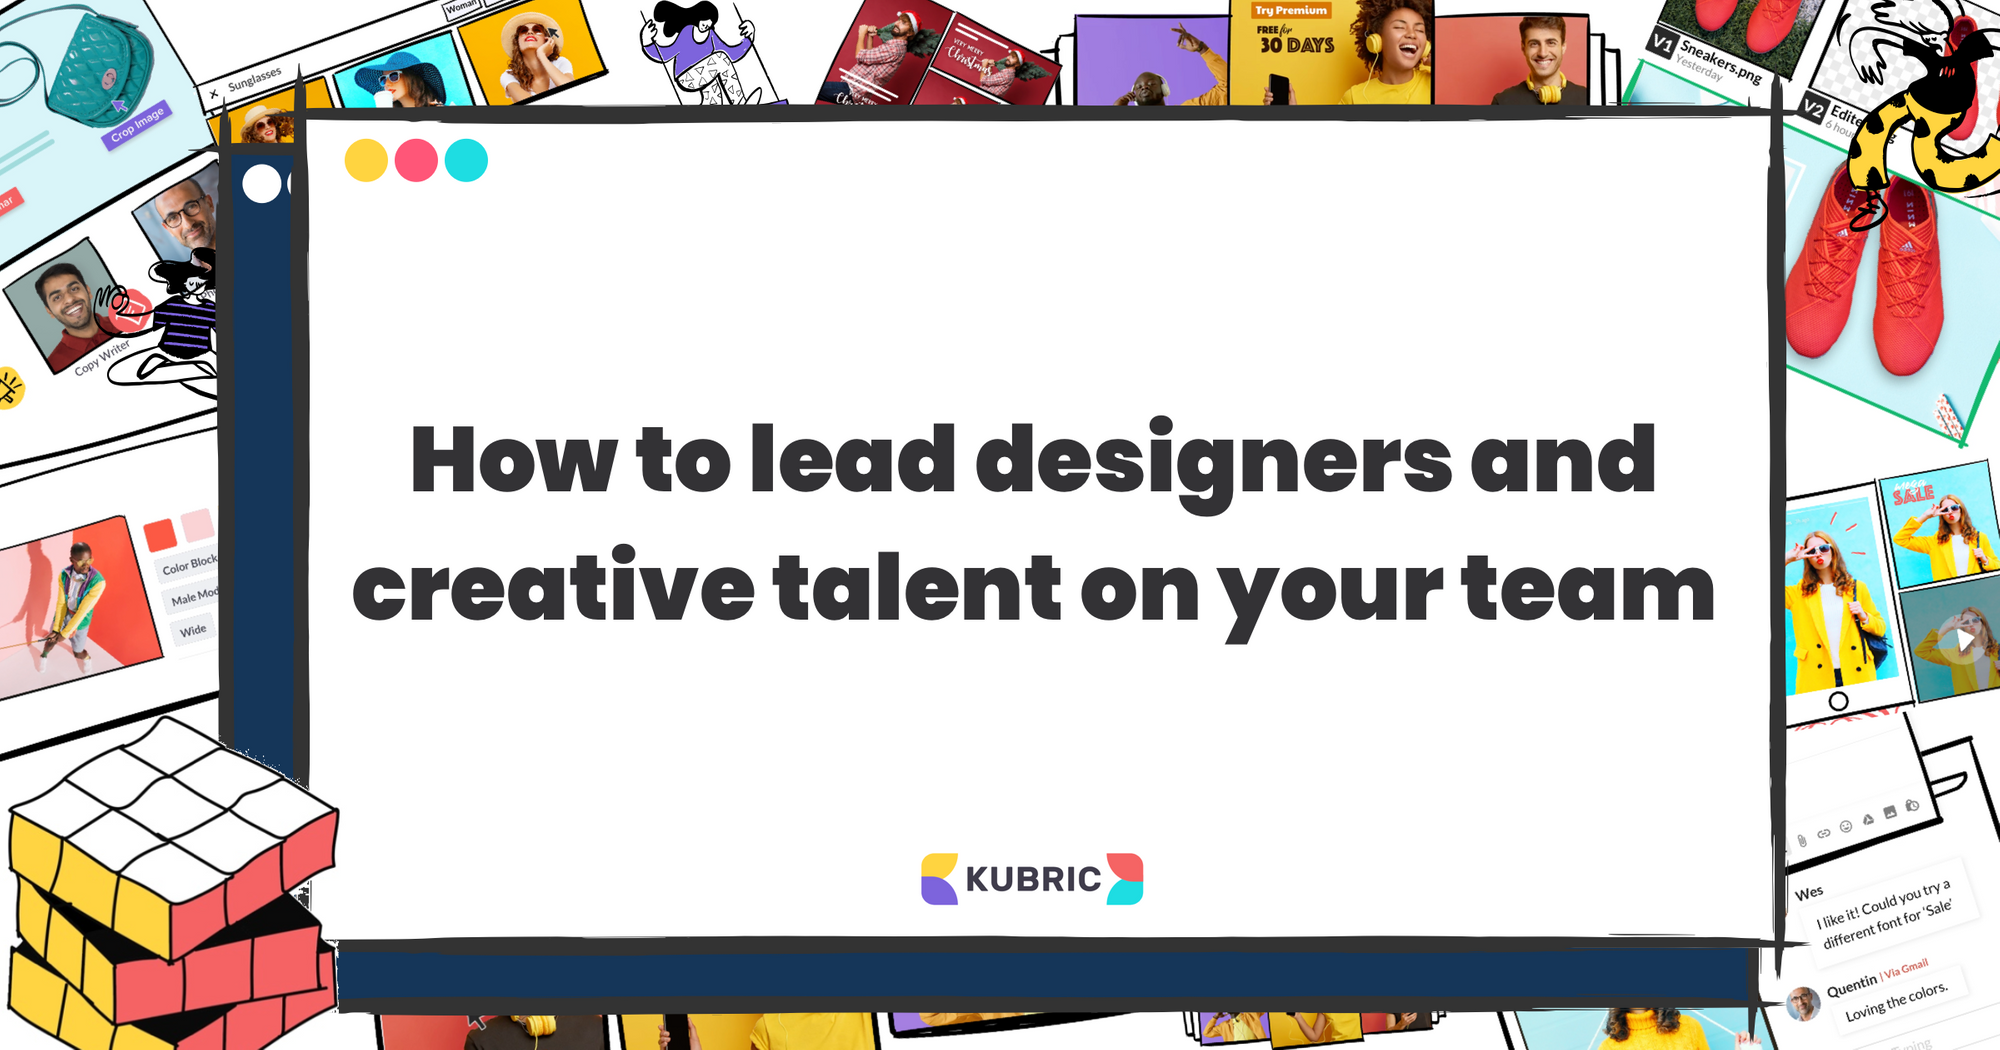 How to lead designers and creative talent on your team